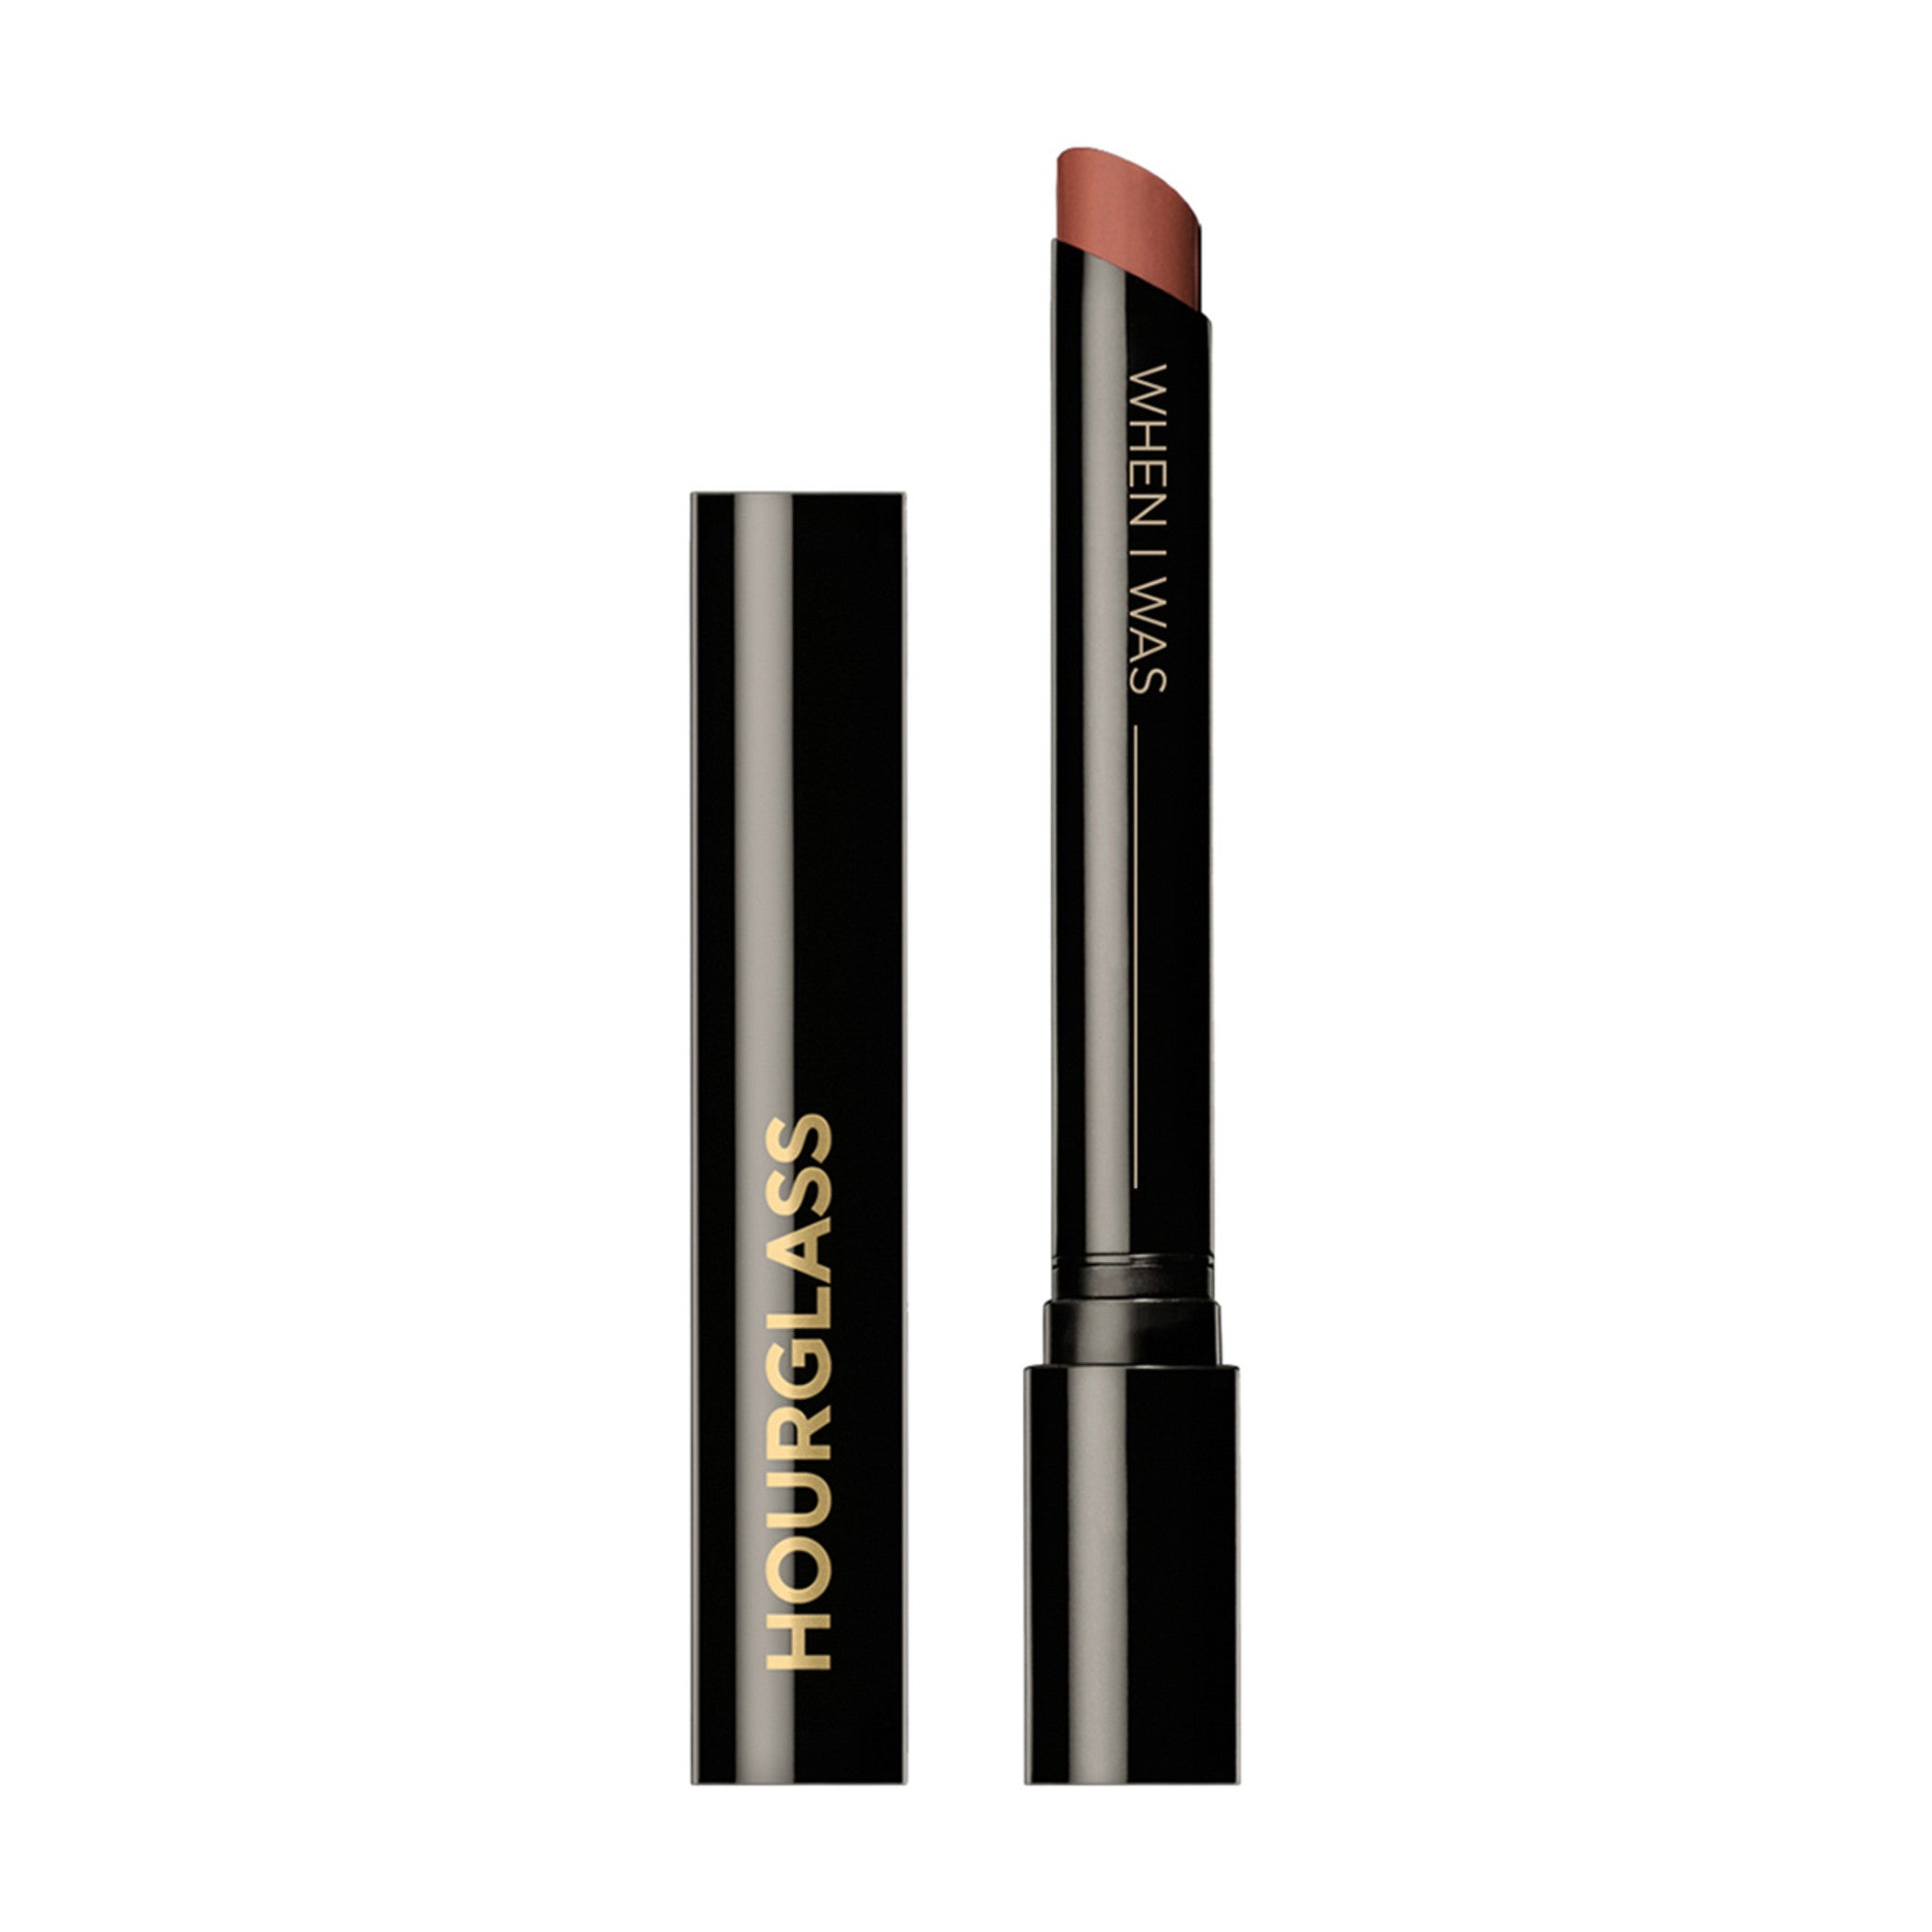 Hourglass Confession Ultra Slim High Intensity Lipstick Refill Color/Shade variant: WHEN I WAS main image. This product is in the color pink